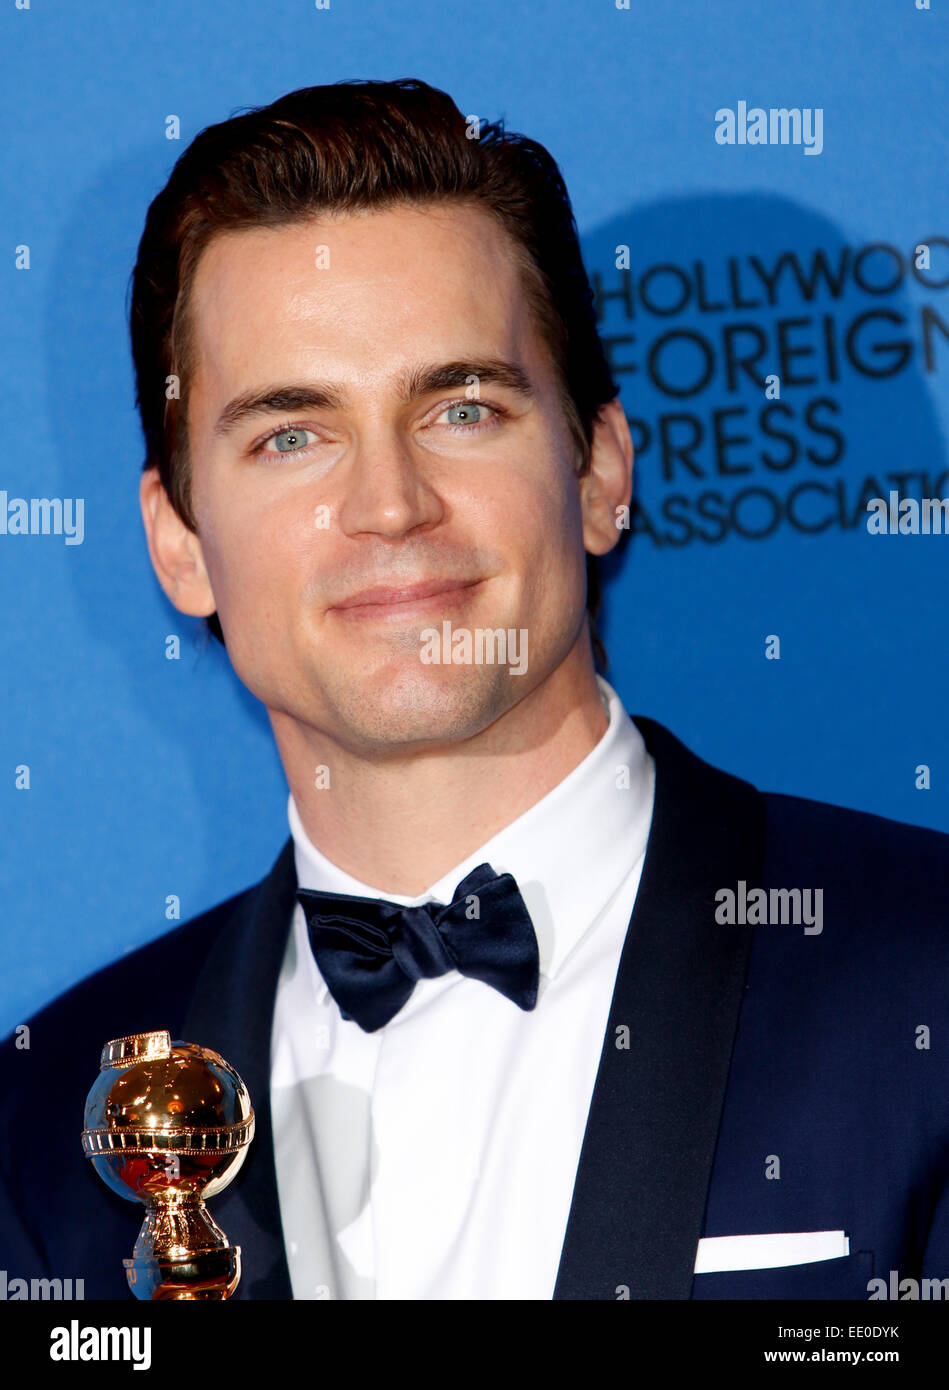 US actor Matt Bomer poses in the press room with his award for Best performance by an actor in a supporting role in a series, mini-series, or a motion picture made for television for 'The Normal Heart' during the 72nd Annual Golden Globe Awards at the Beverly Hilton Hotel, in Beverly Hills, California, USA, 11 January 2015. Photo: Hubert Boesl/dpa- NO WIRE SERVICE - Stock Photo